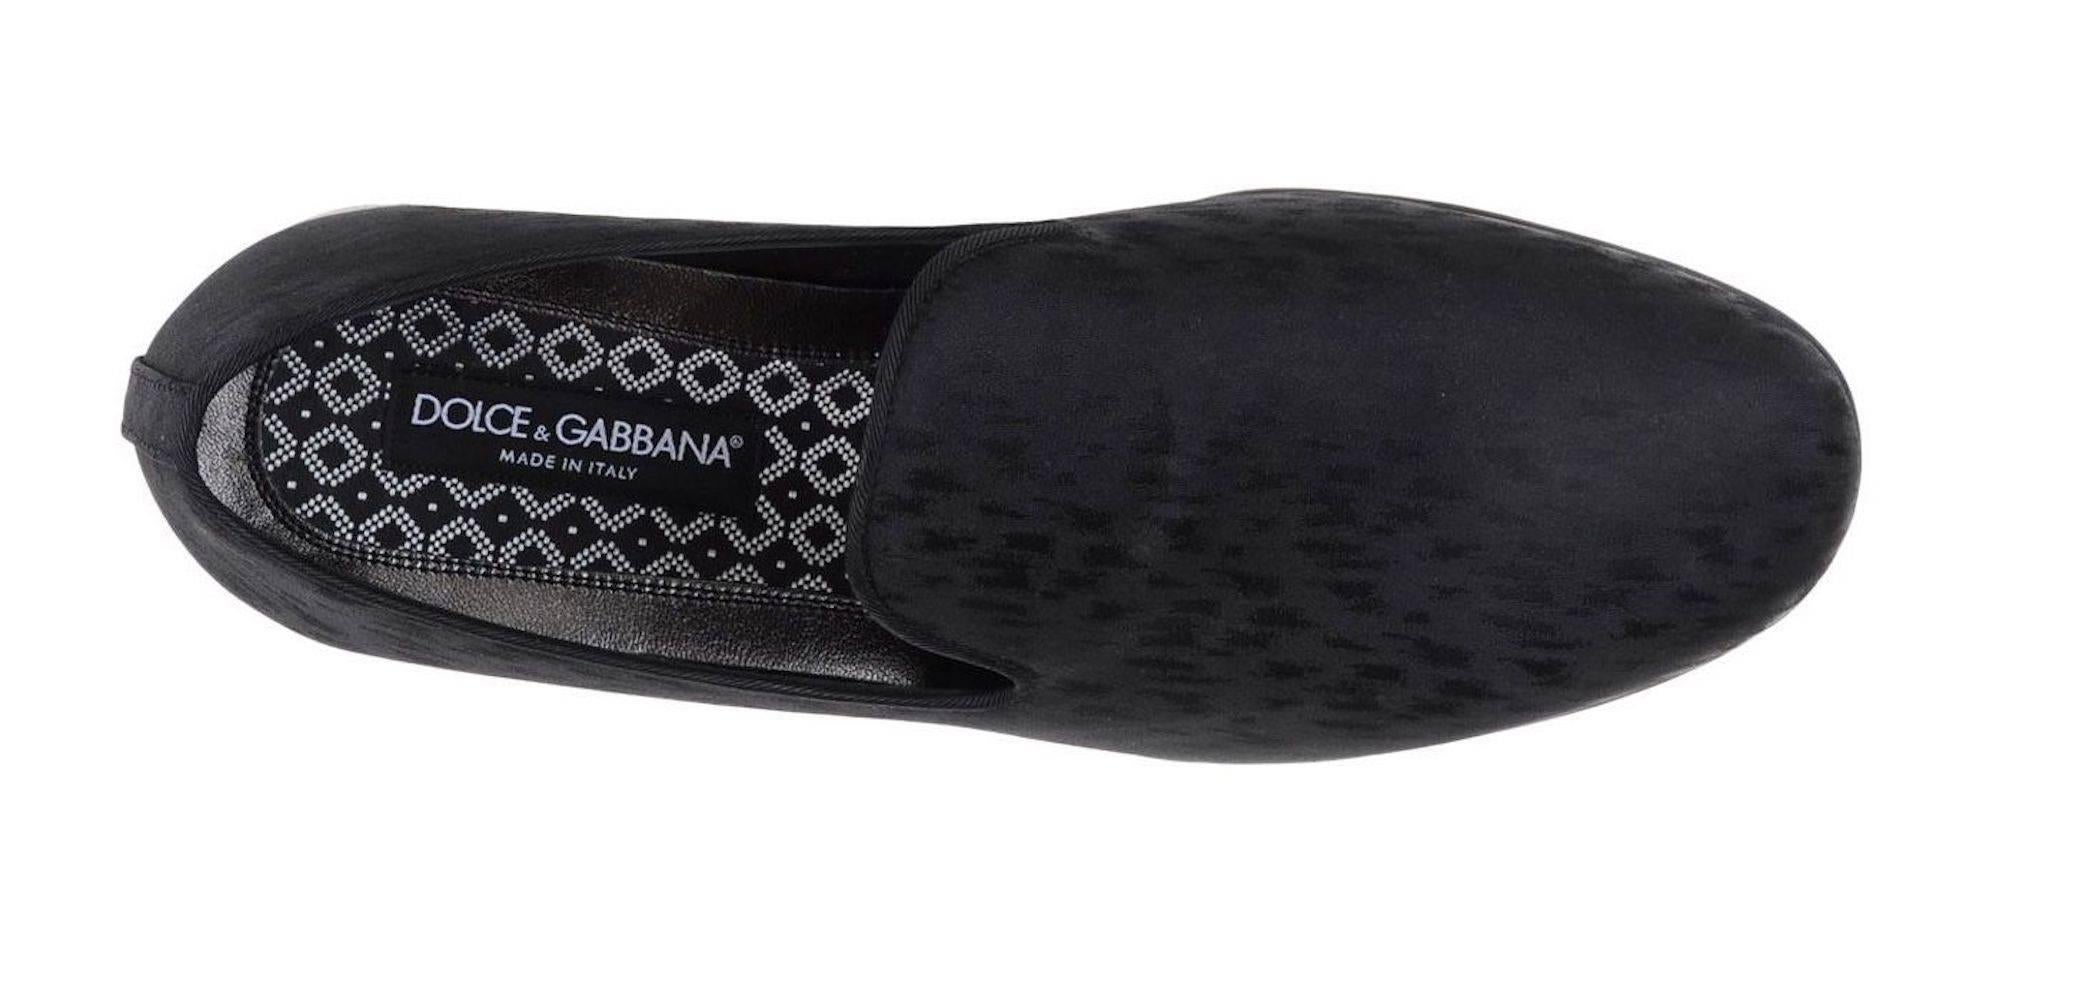 CURATOR'S NOTES

Dolce & Gabbana New Men's Black Patterned Smoking Slippers Loafers Shoes in Box  

Size UK 11 (US 12)
Satin
Leather lining
Made in Italy
Heel height 1"
Includes original Dolce & Gabbana box